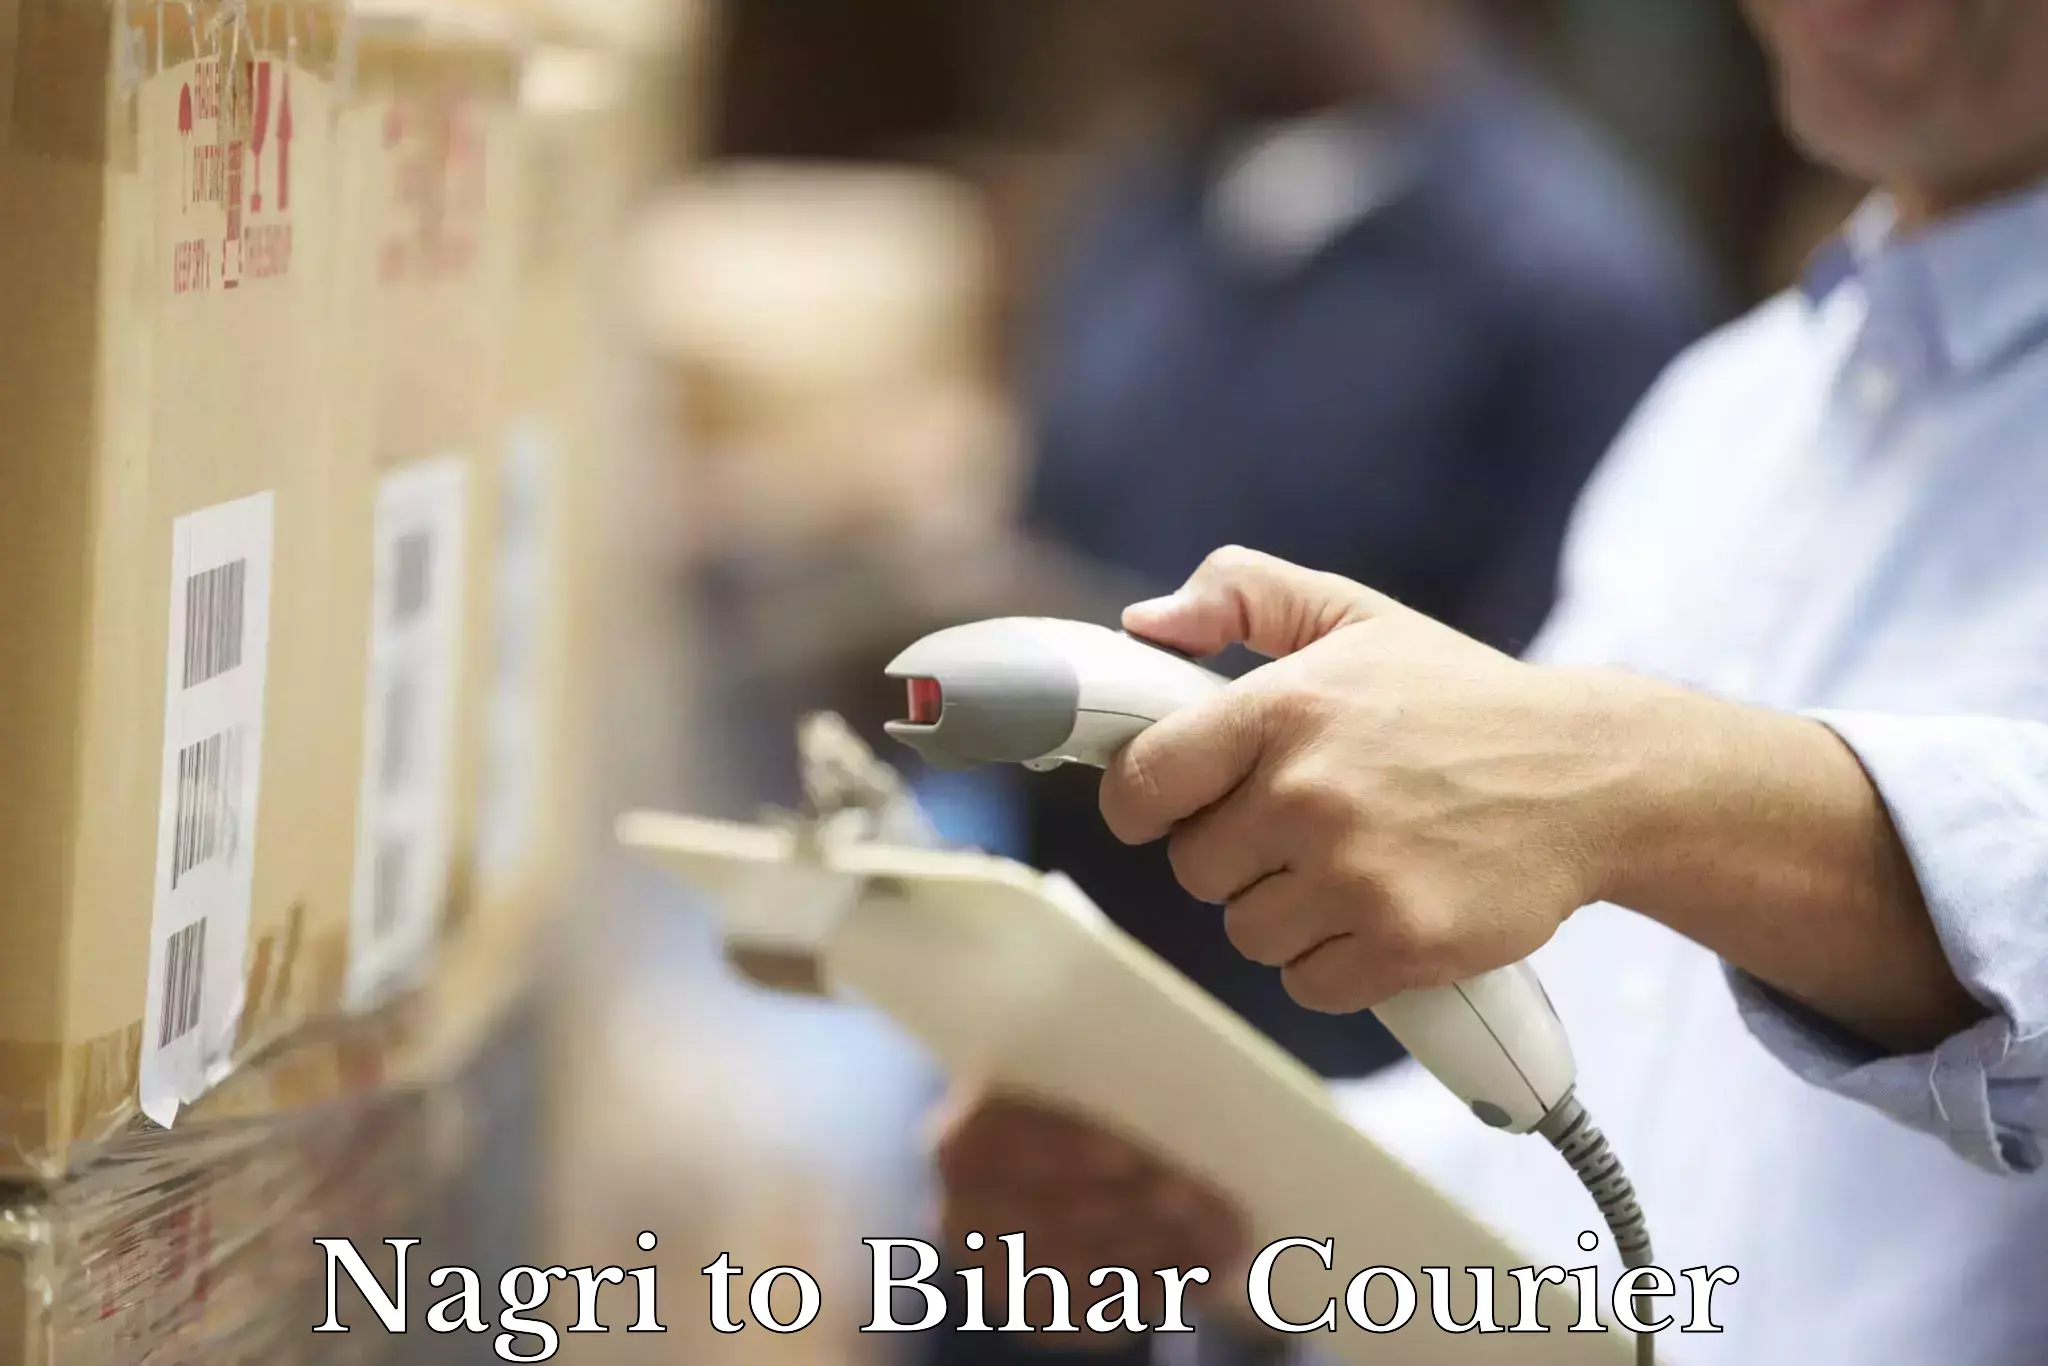 Courier insurance Nagri to Buxar